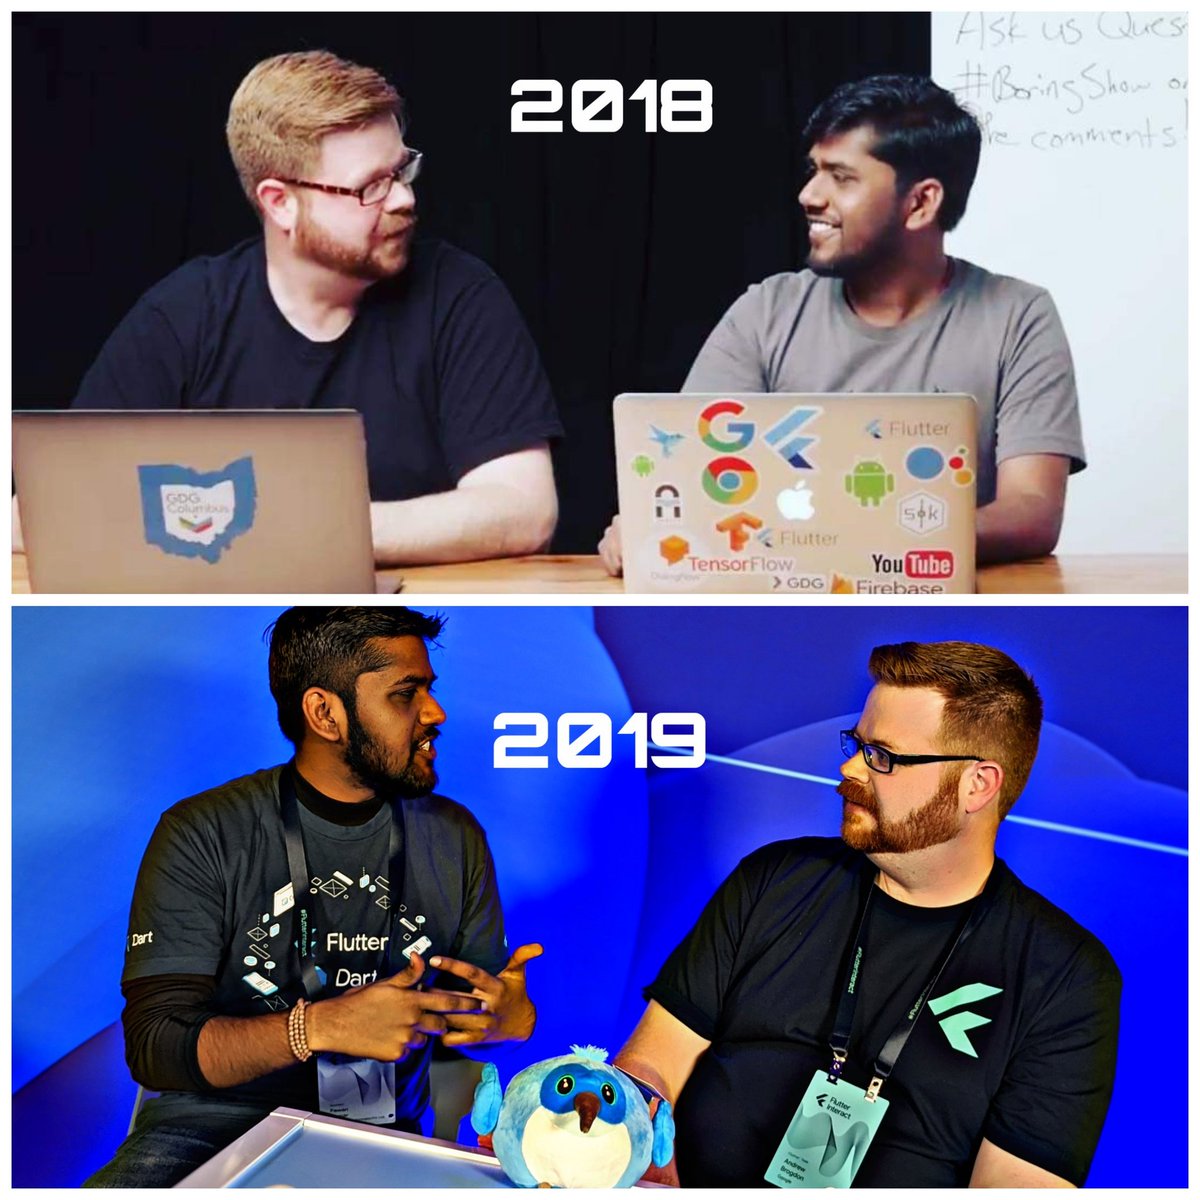 Everything has changed in just 1 year. So we recreated this moment. Thanks @redbrogdon for always being awesome.

#TheBoringShow #AskFlutter #FlutterInteract #Journey